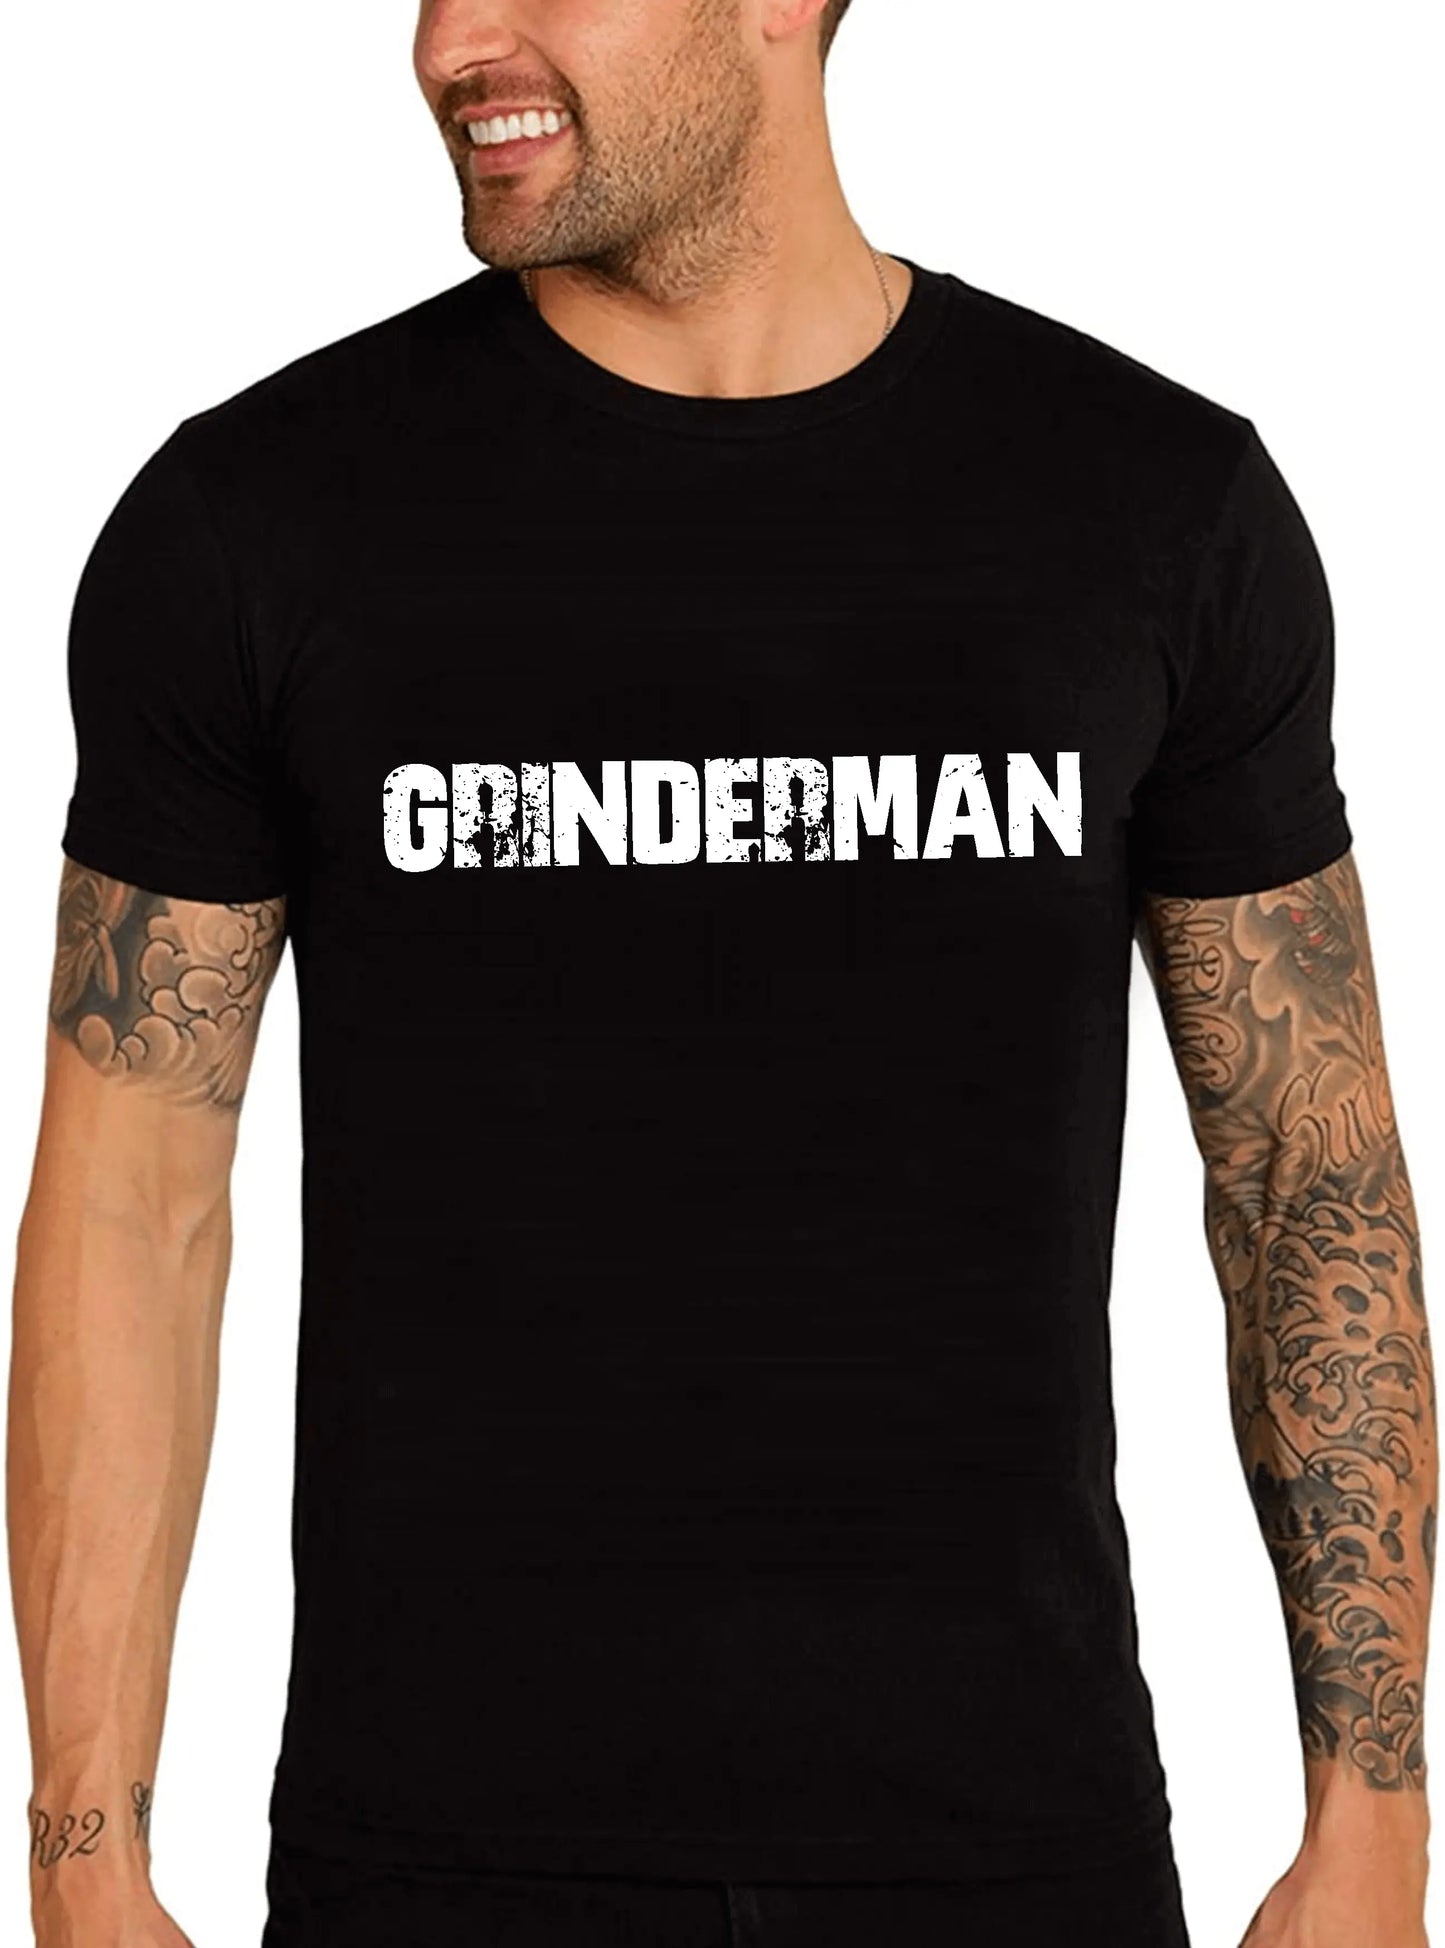 Men's Graphic T-Shirt Grinderman Eco-Friendly Limited Edition Short Sleeve Tee-Shirt Vintage Birthday Gift Novelty